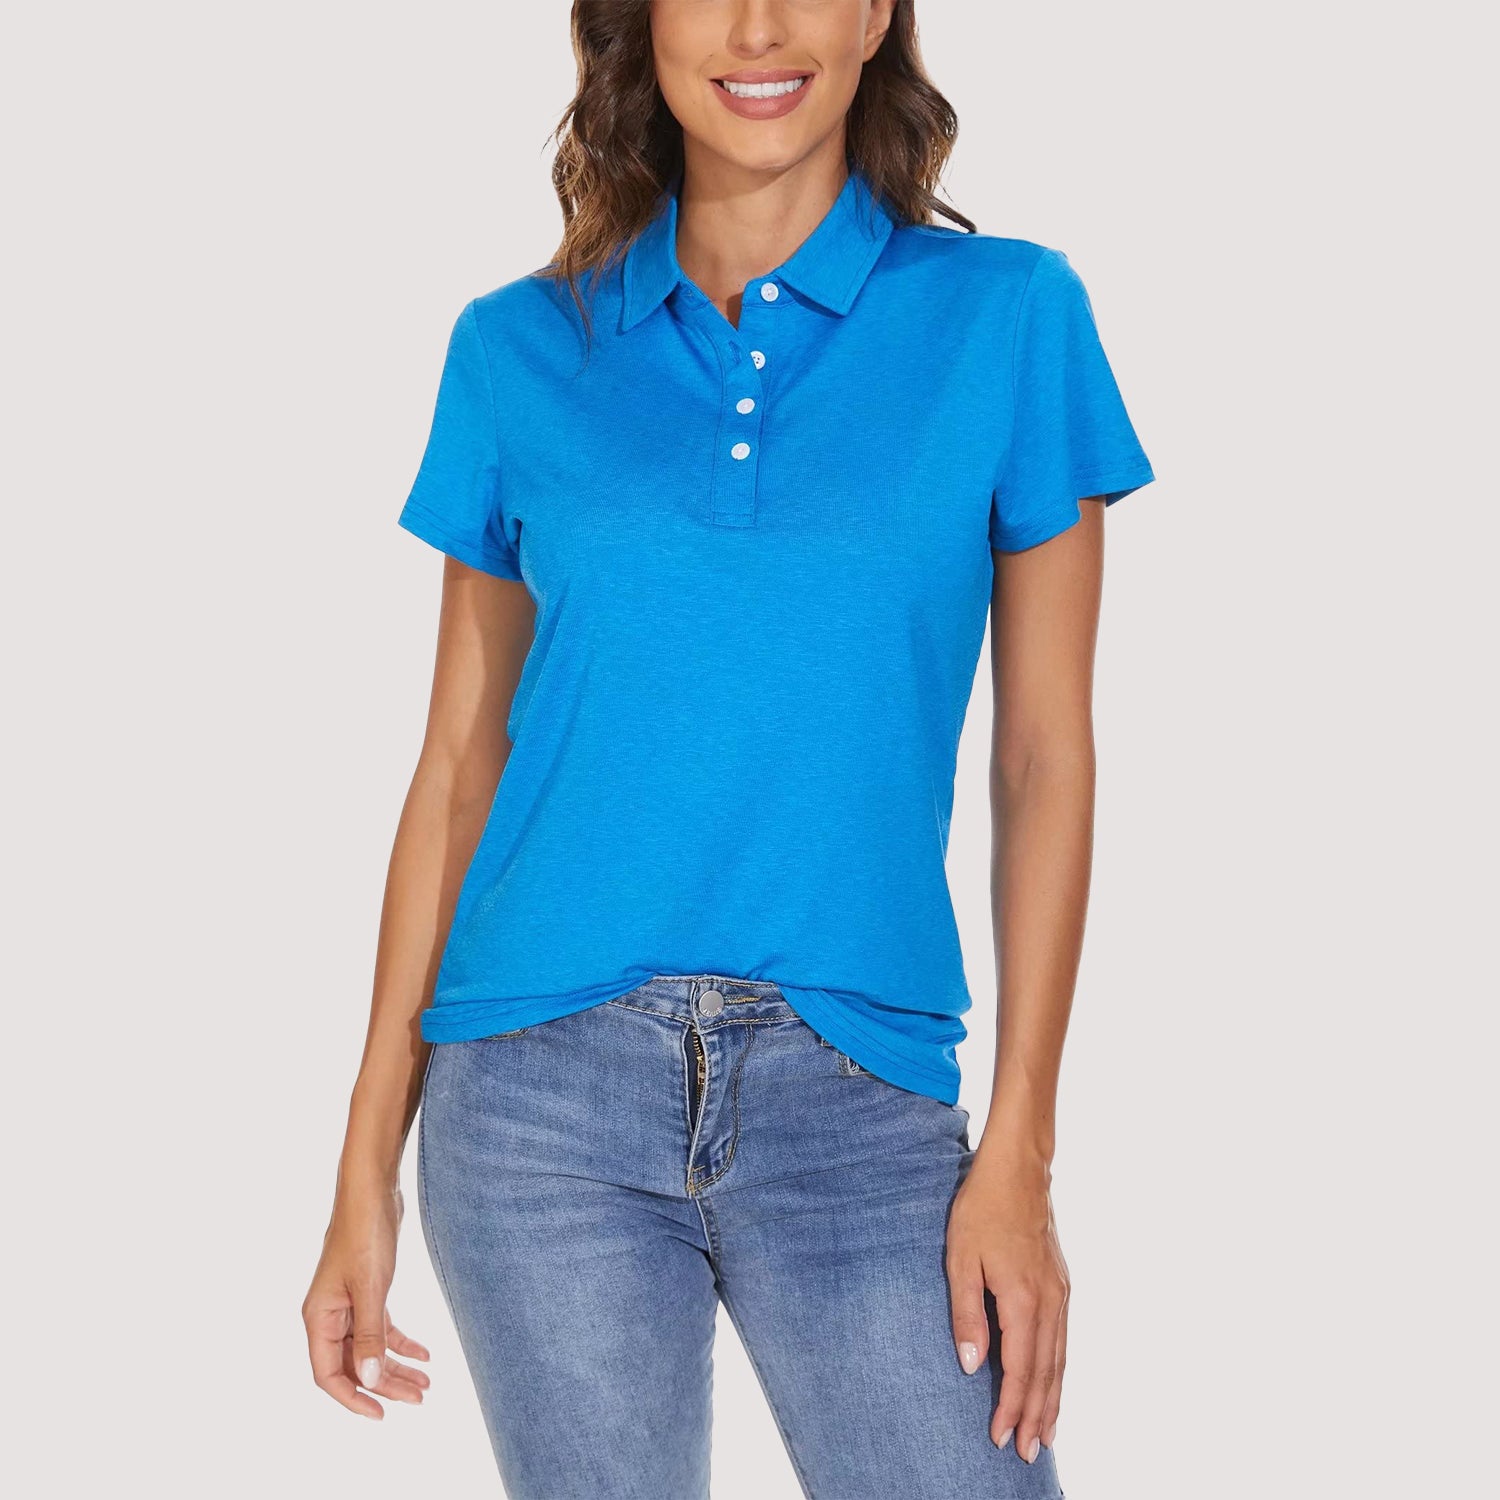 Women's Polo T-Shirts 4-Button Moisture Wicking Athletic Tee Shirts